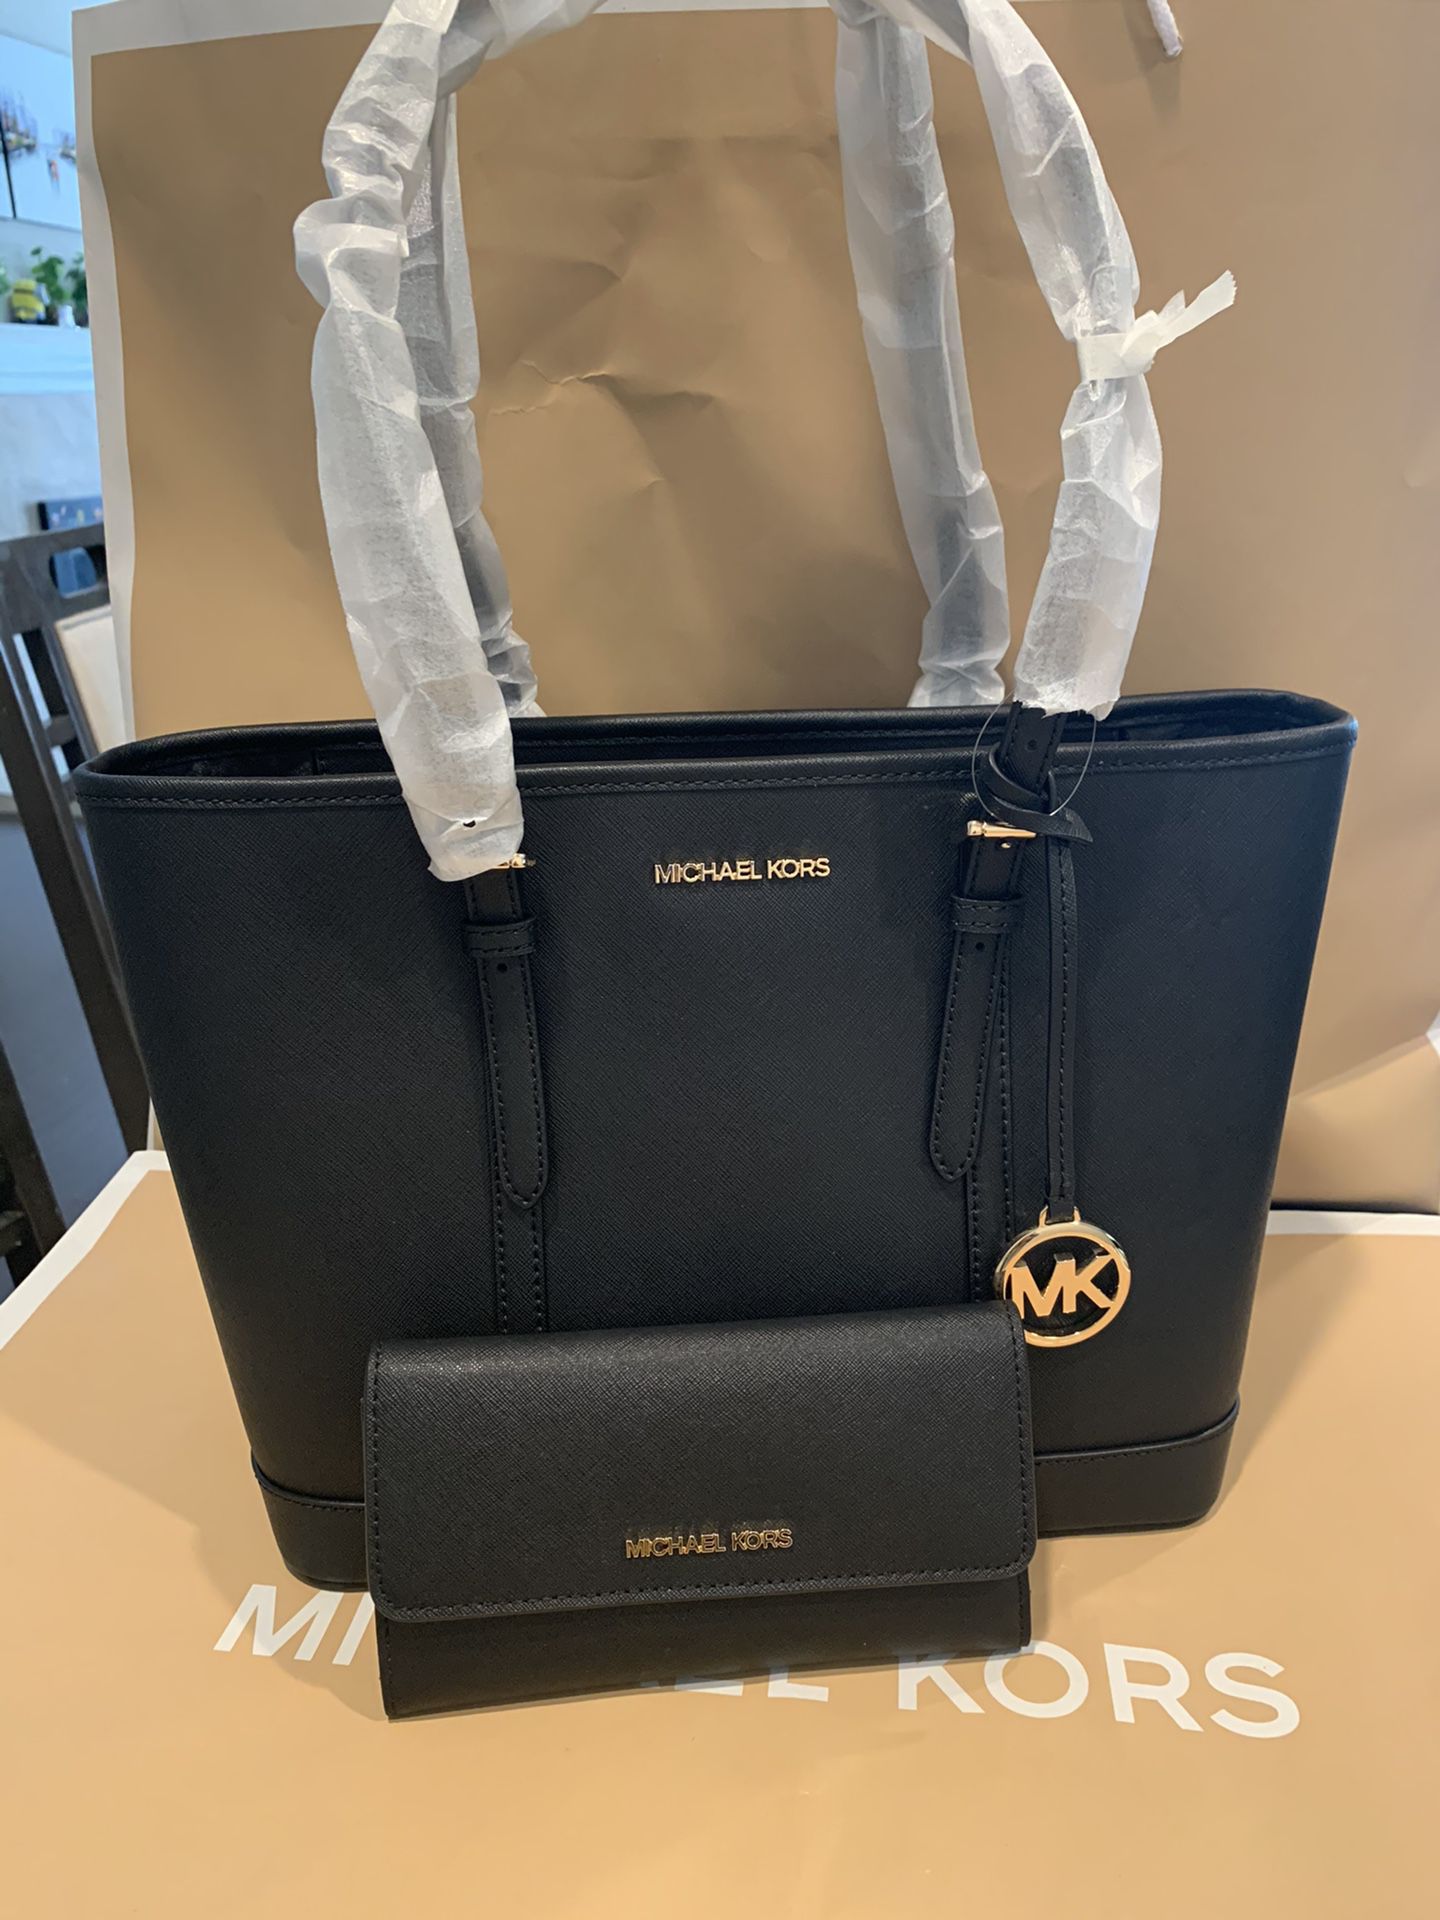 Brand new !!! 💯 Authentic !!! Michael kors small tote with a matching wallet** firm price** low offers will be ignored